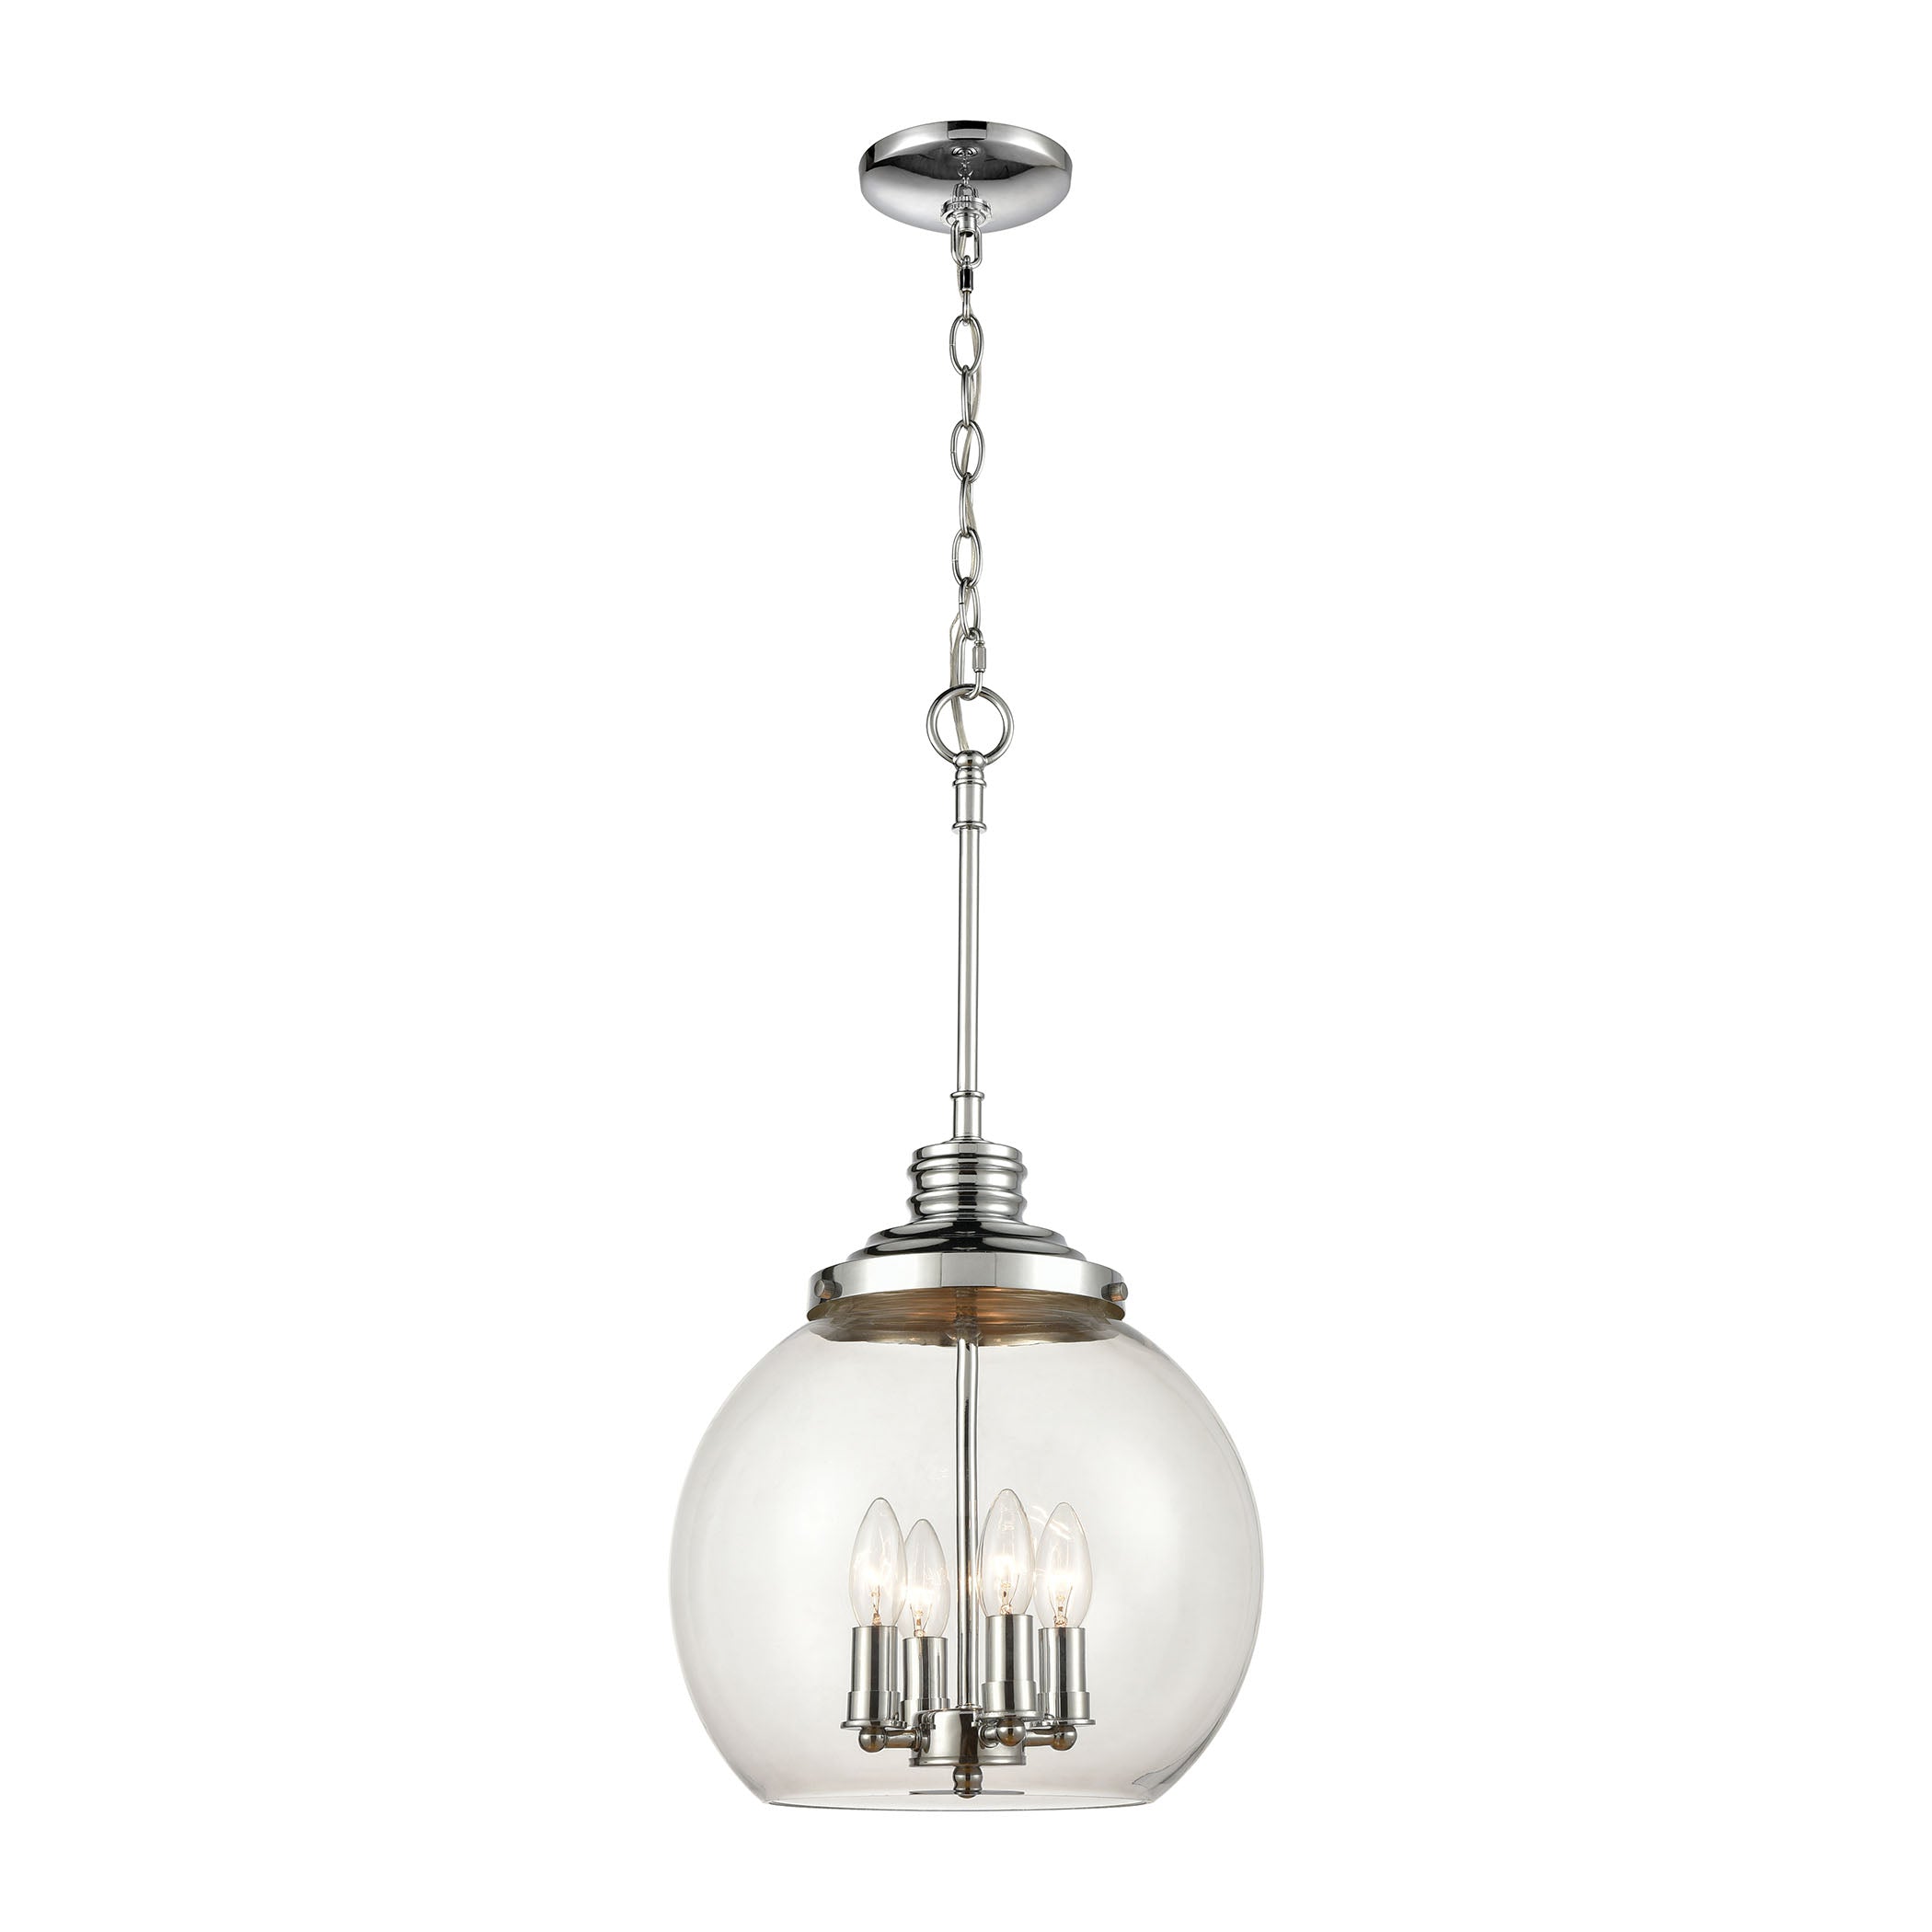 ELK Lighting 46824/4 Chandra 4-Light Pendant in Polished Chrome with Clear Glass